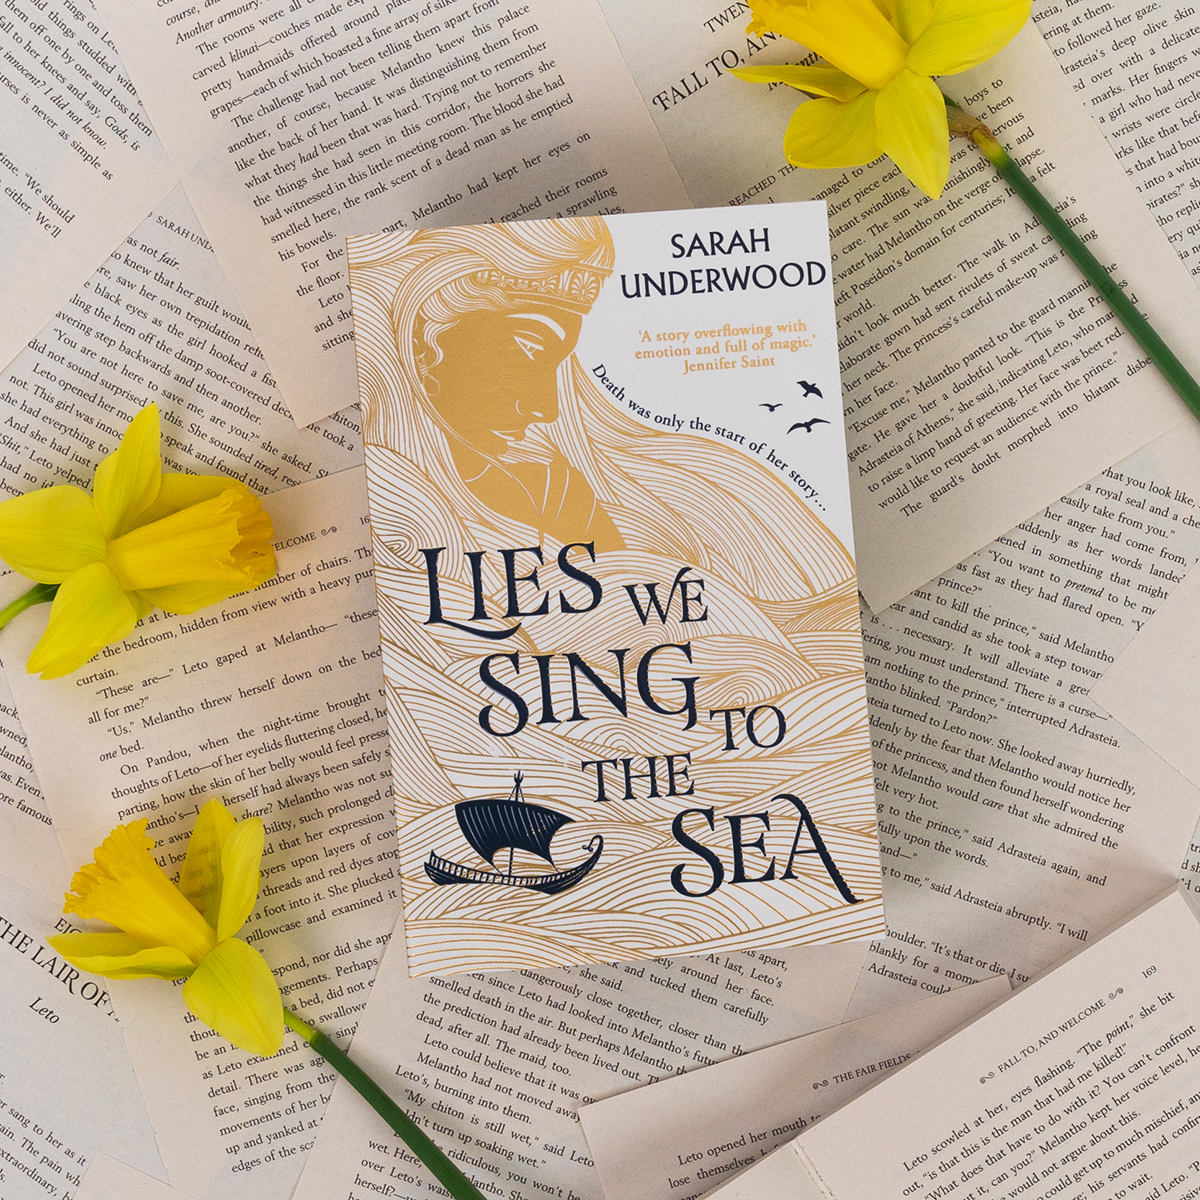 She's here 💛🌊 Lies We Sing to the Sea , the lyrical masterpiece of 2023 by @s_e_c_underwood is now out in paperback! If sapphic, tragic romantasies are your vibe - look no further! Order here: ow.ly/uWFQ50QJ6Ya